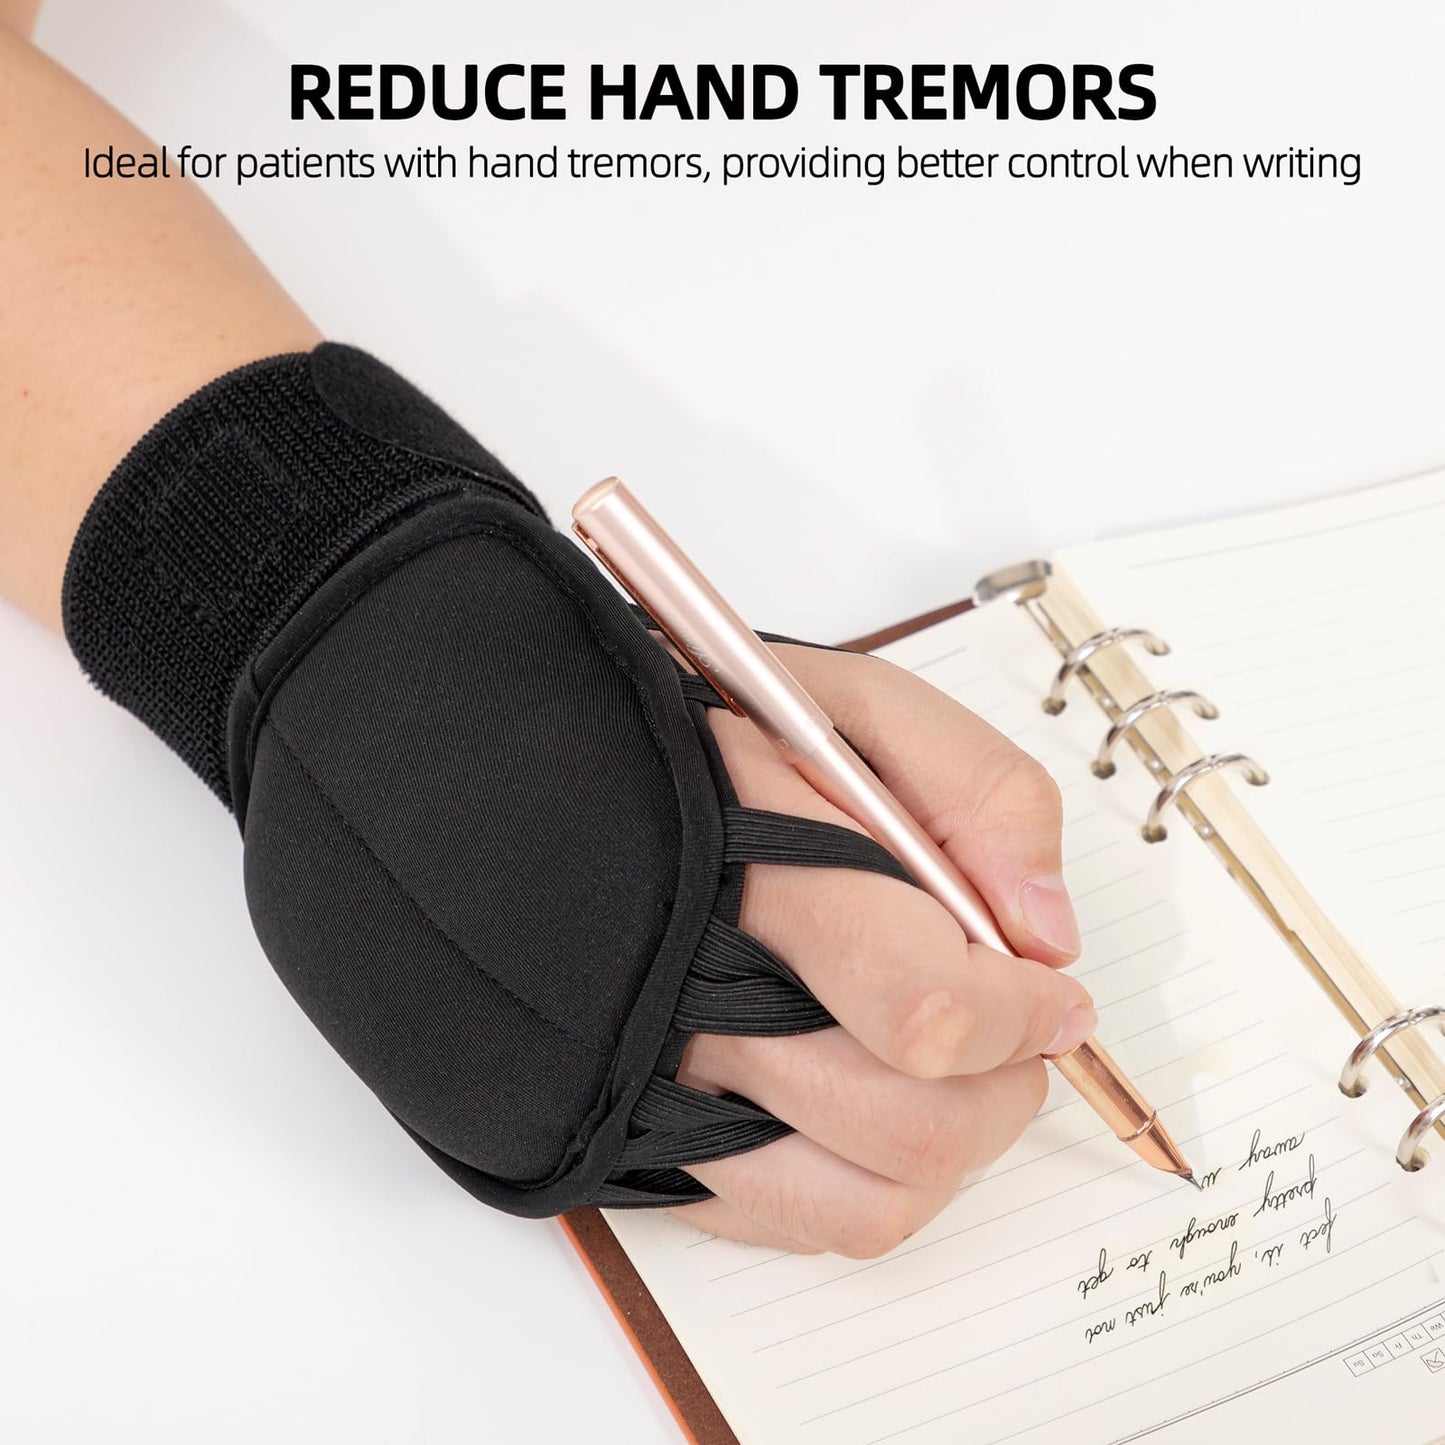 Hand Weights for Fine Motor Skills, Weighted Gloves for Tremors, Aid for Hand Tremors and Parkinsons Patients, Writing Weights & Hand Strengthening Tool